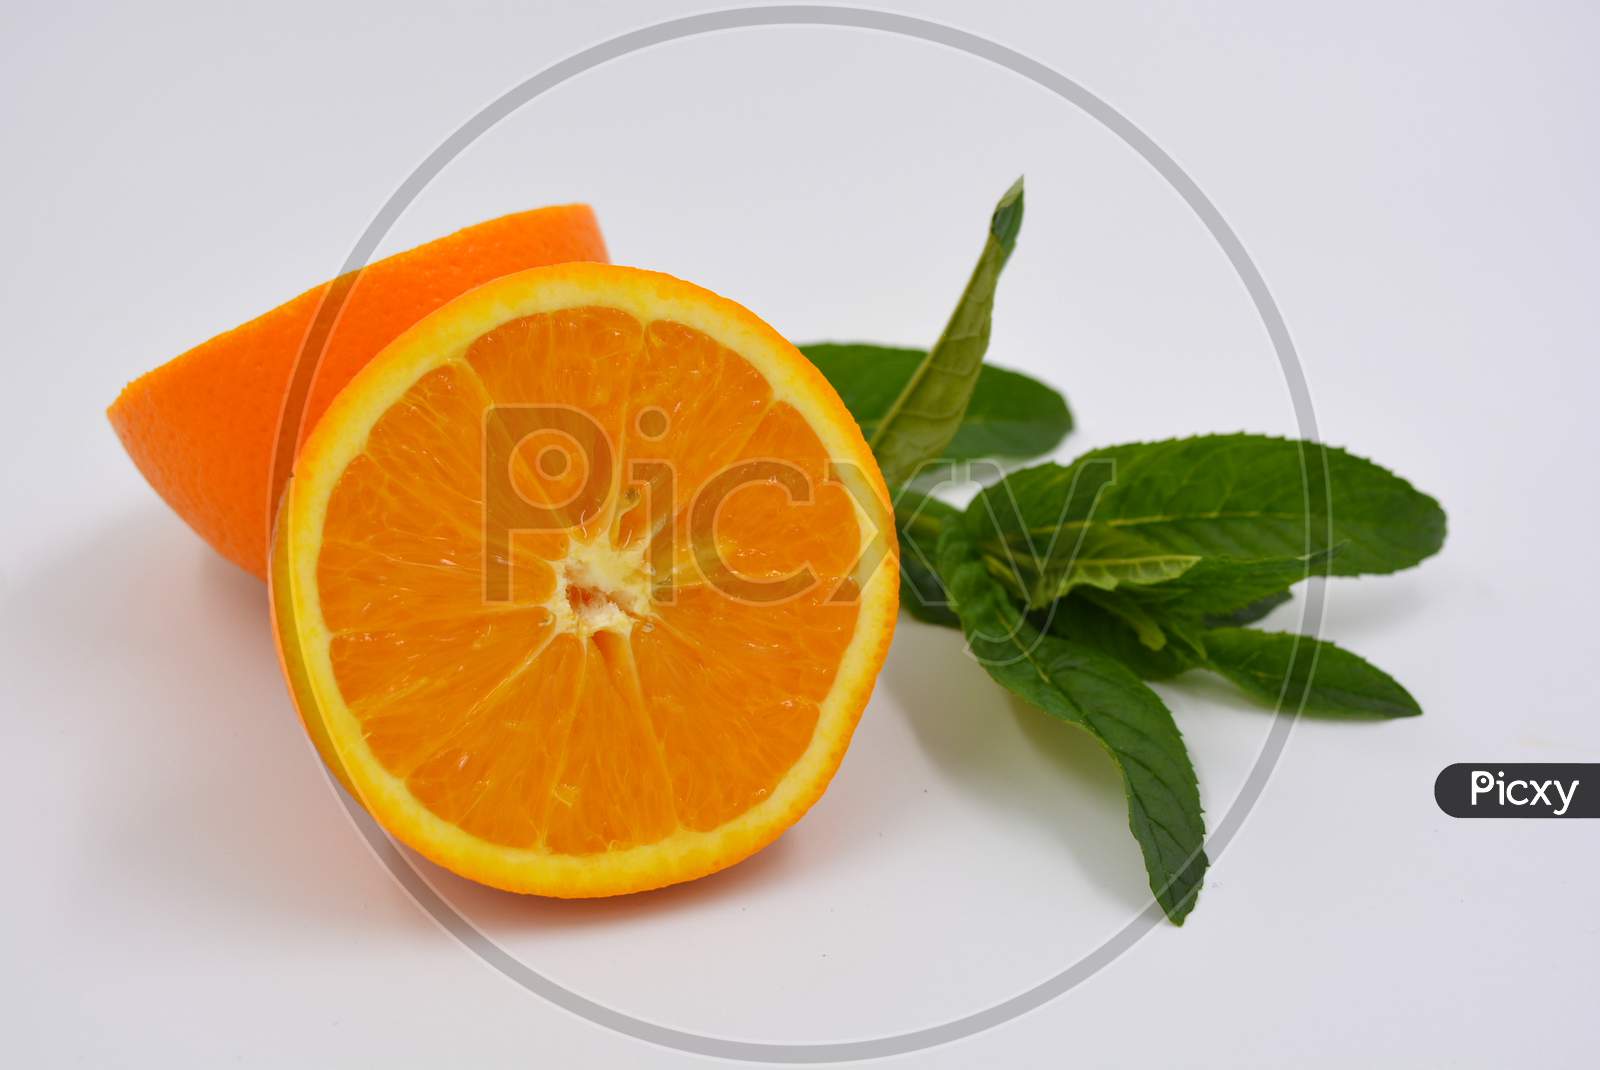 Healthy ripe delicious fruits for human health. Juicy fruits of orange orange with bright green mint. Two halves of an orange with large green leaves.